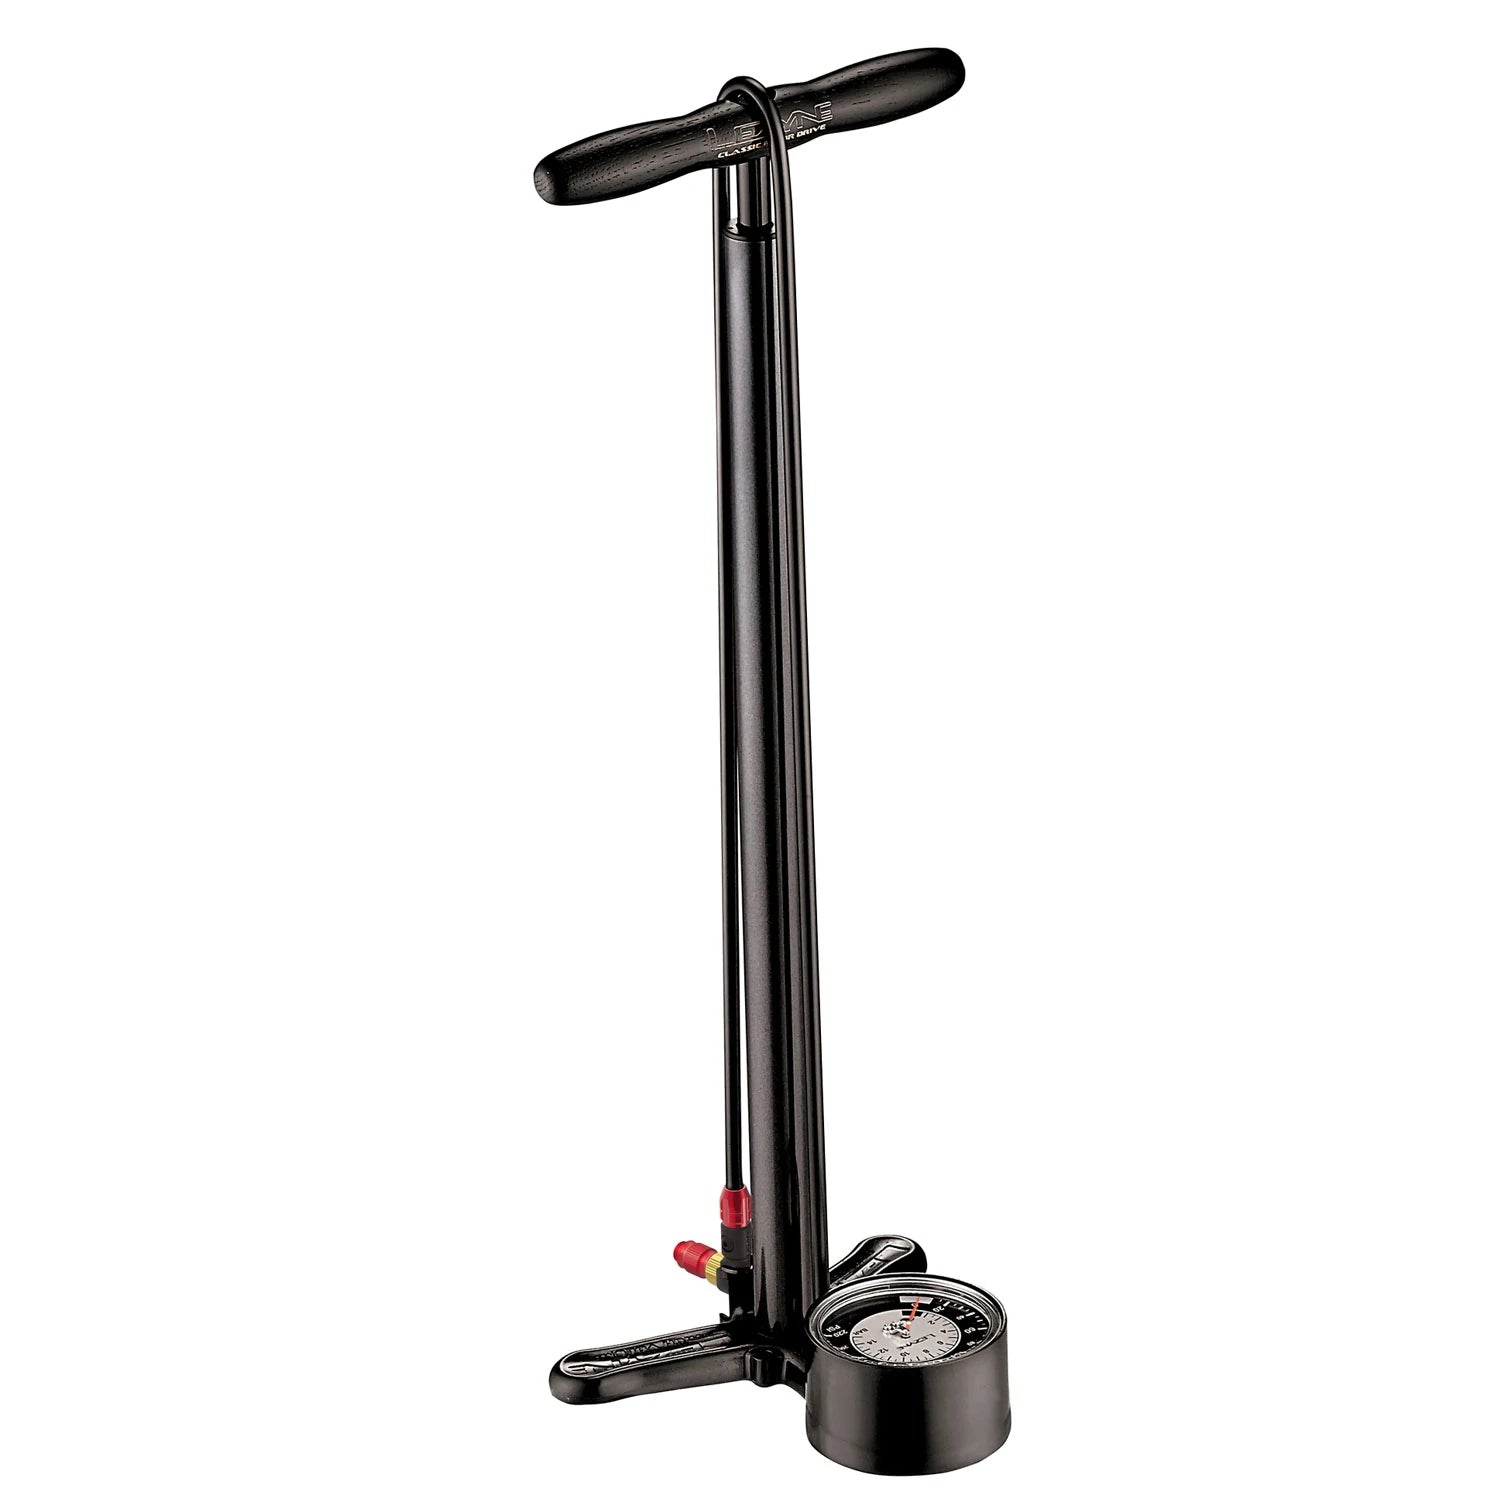 Lezyne Classic floor drive standing up on a white background